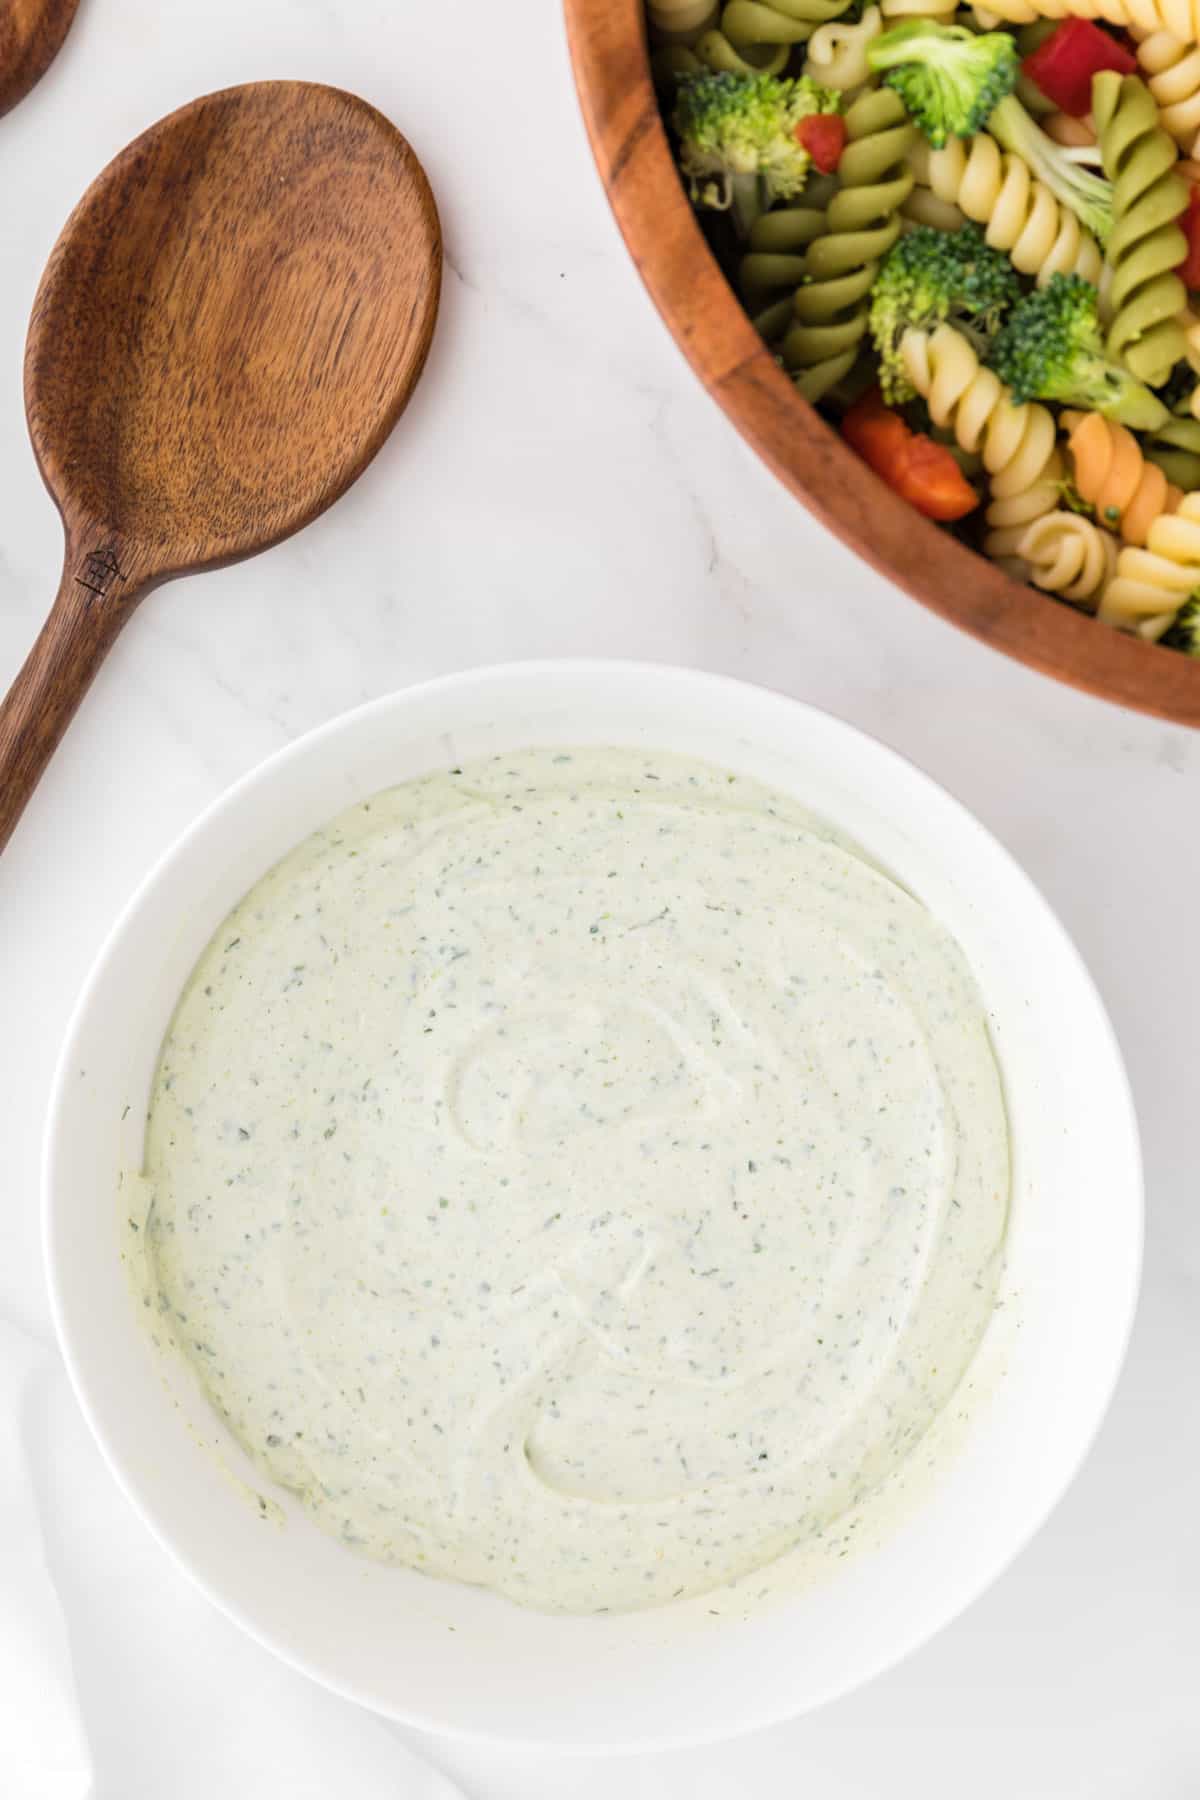 ranch pasta salad dressing in a bowl